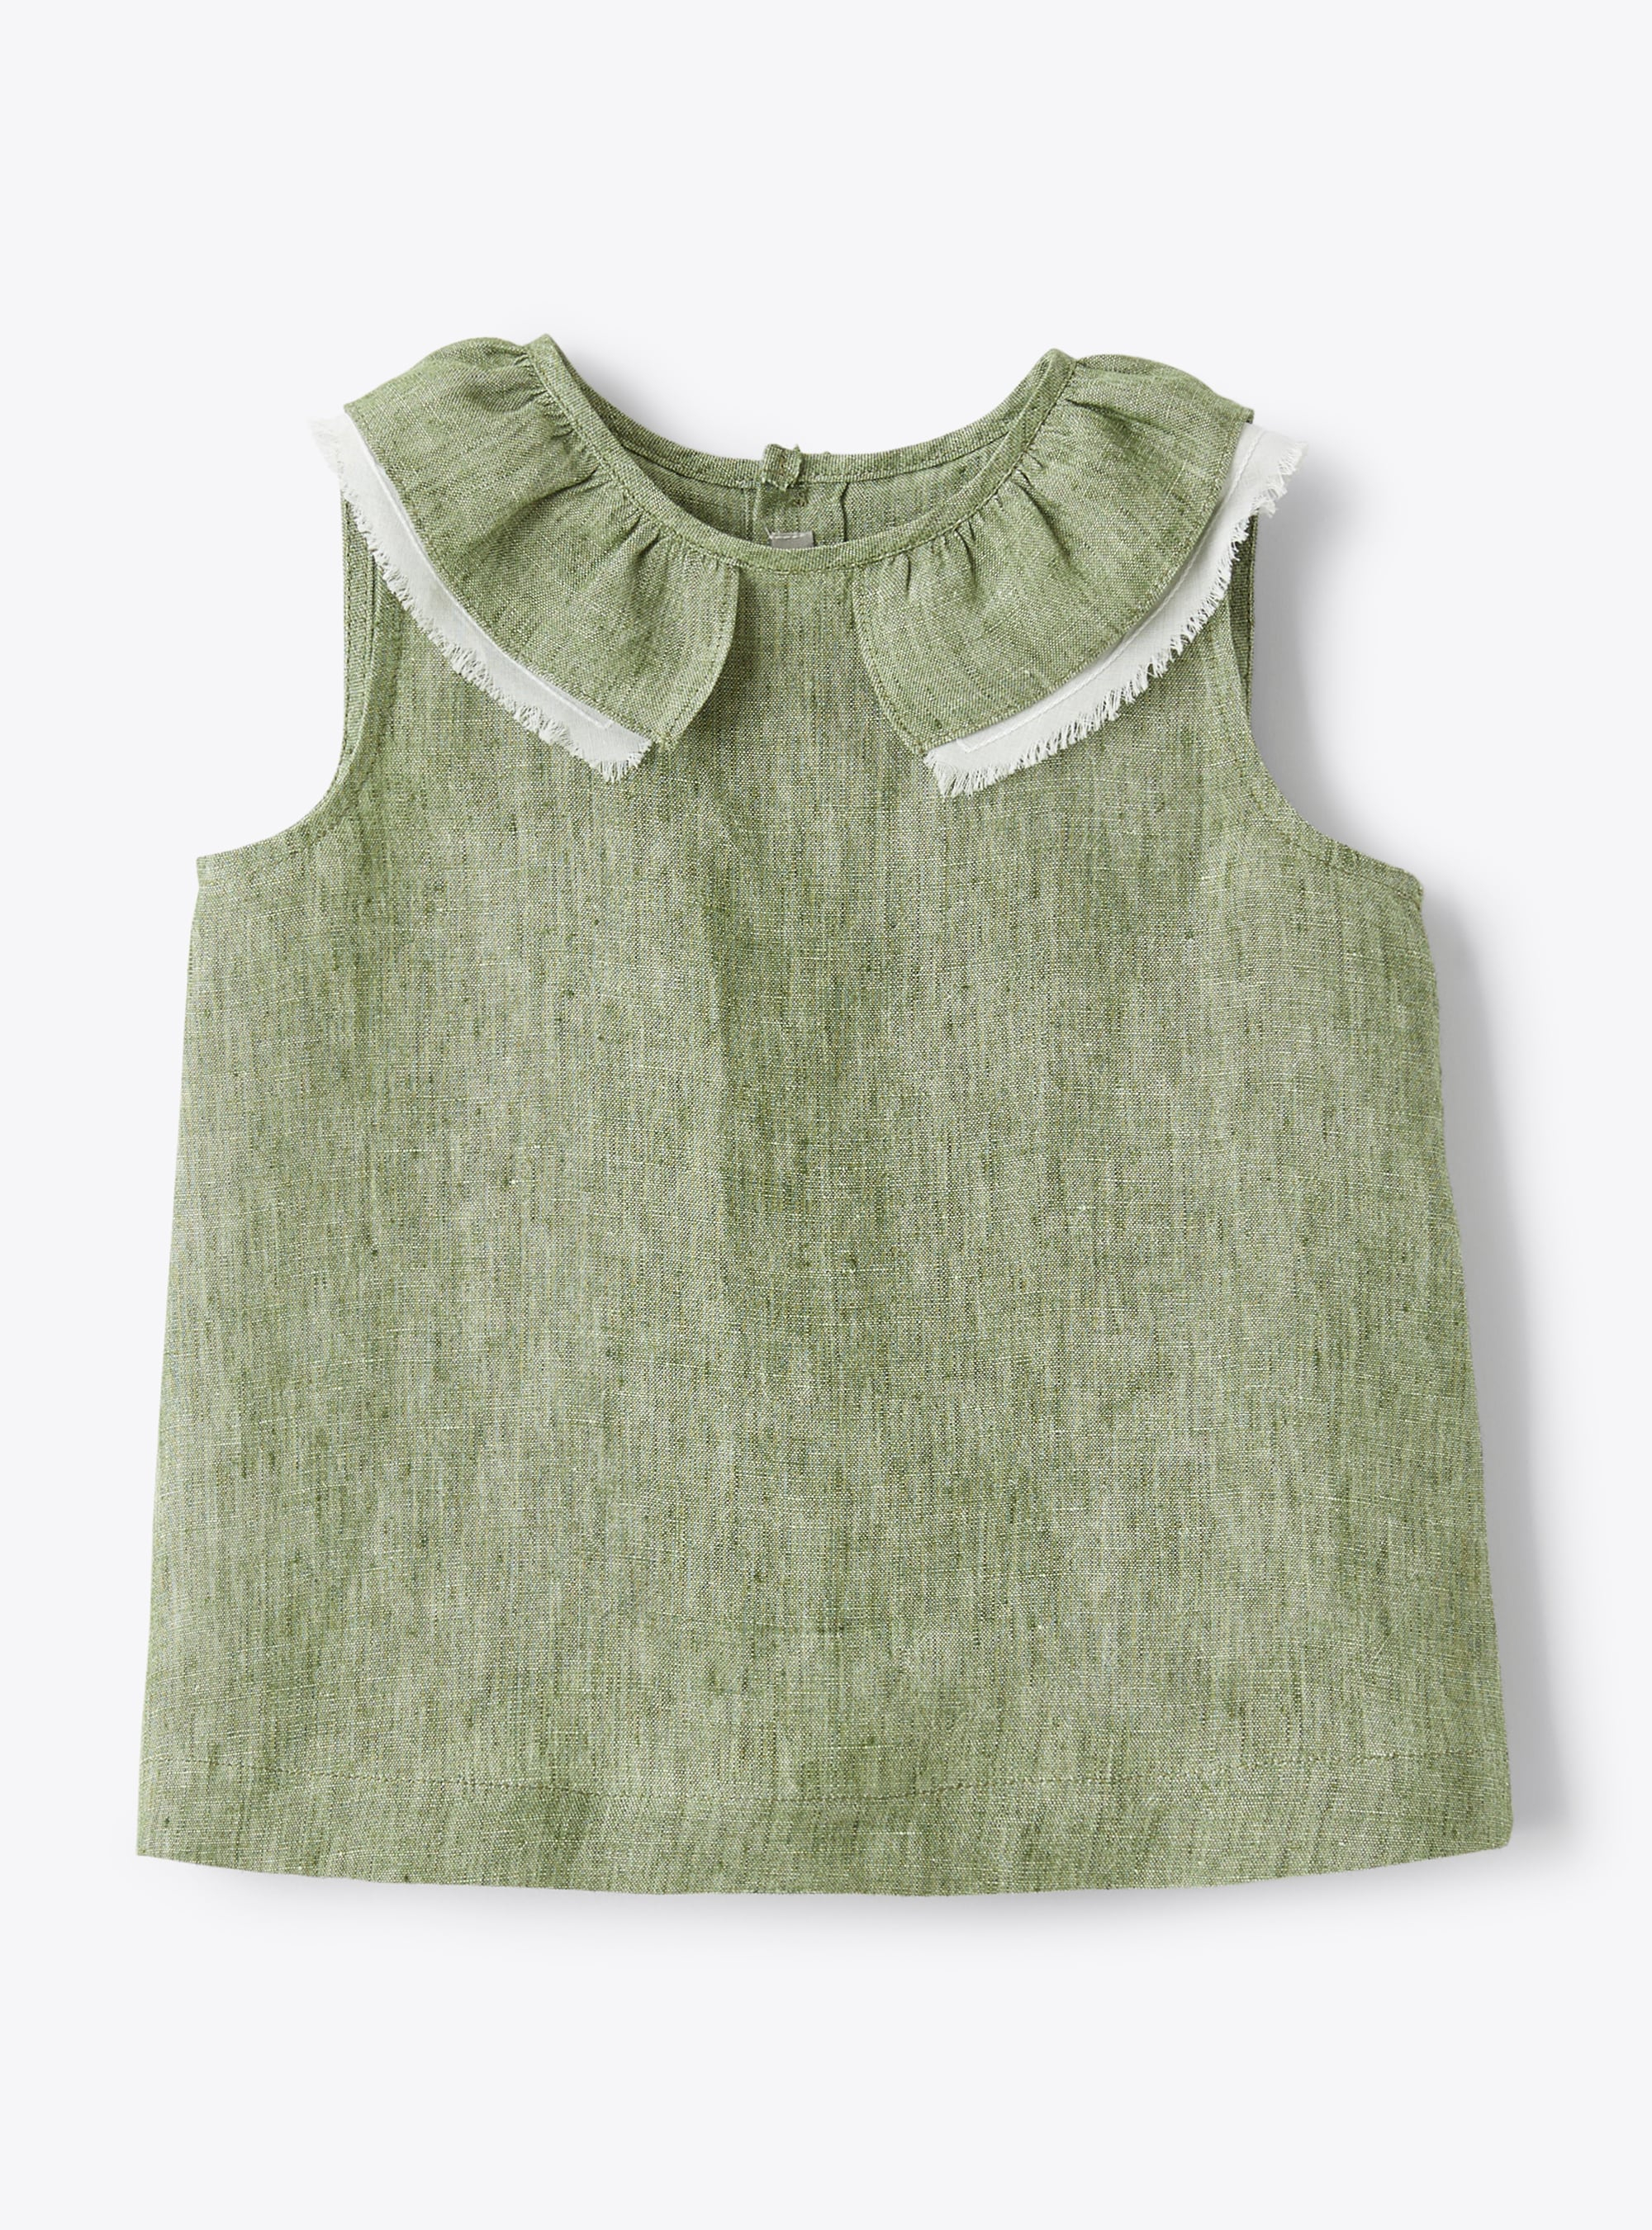 Top in sage-green mélange linen - Shirts - Il Gufo